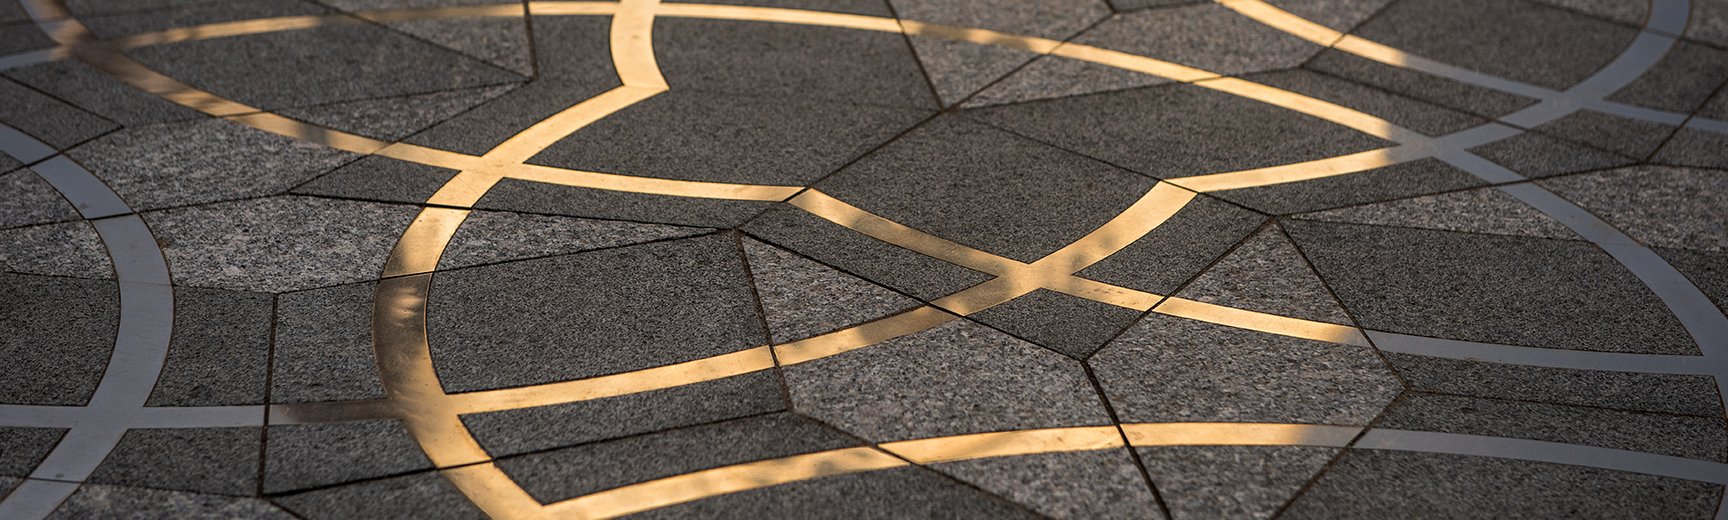 Penrose paving at the Maths Institute